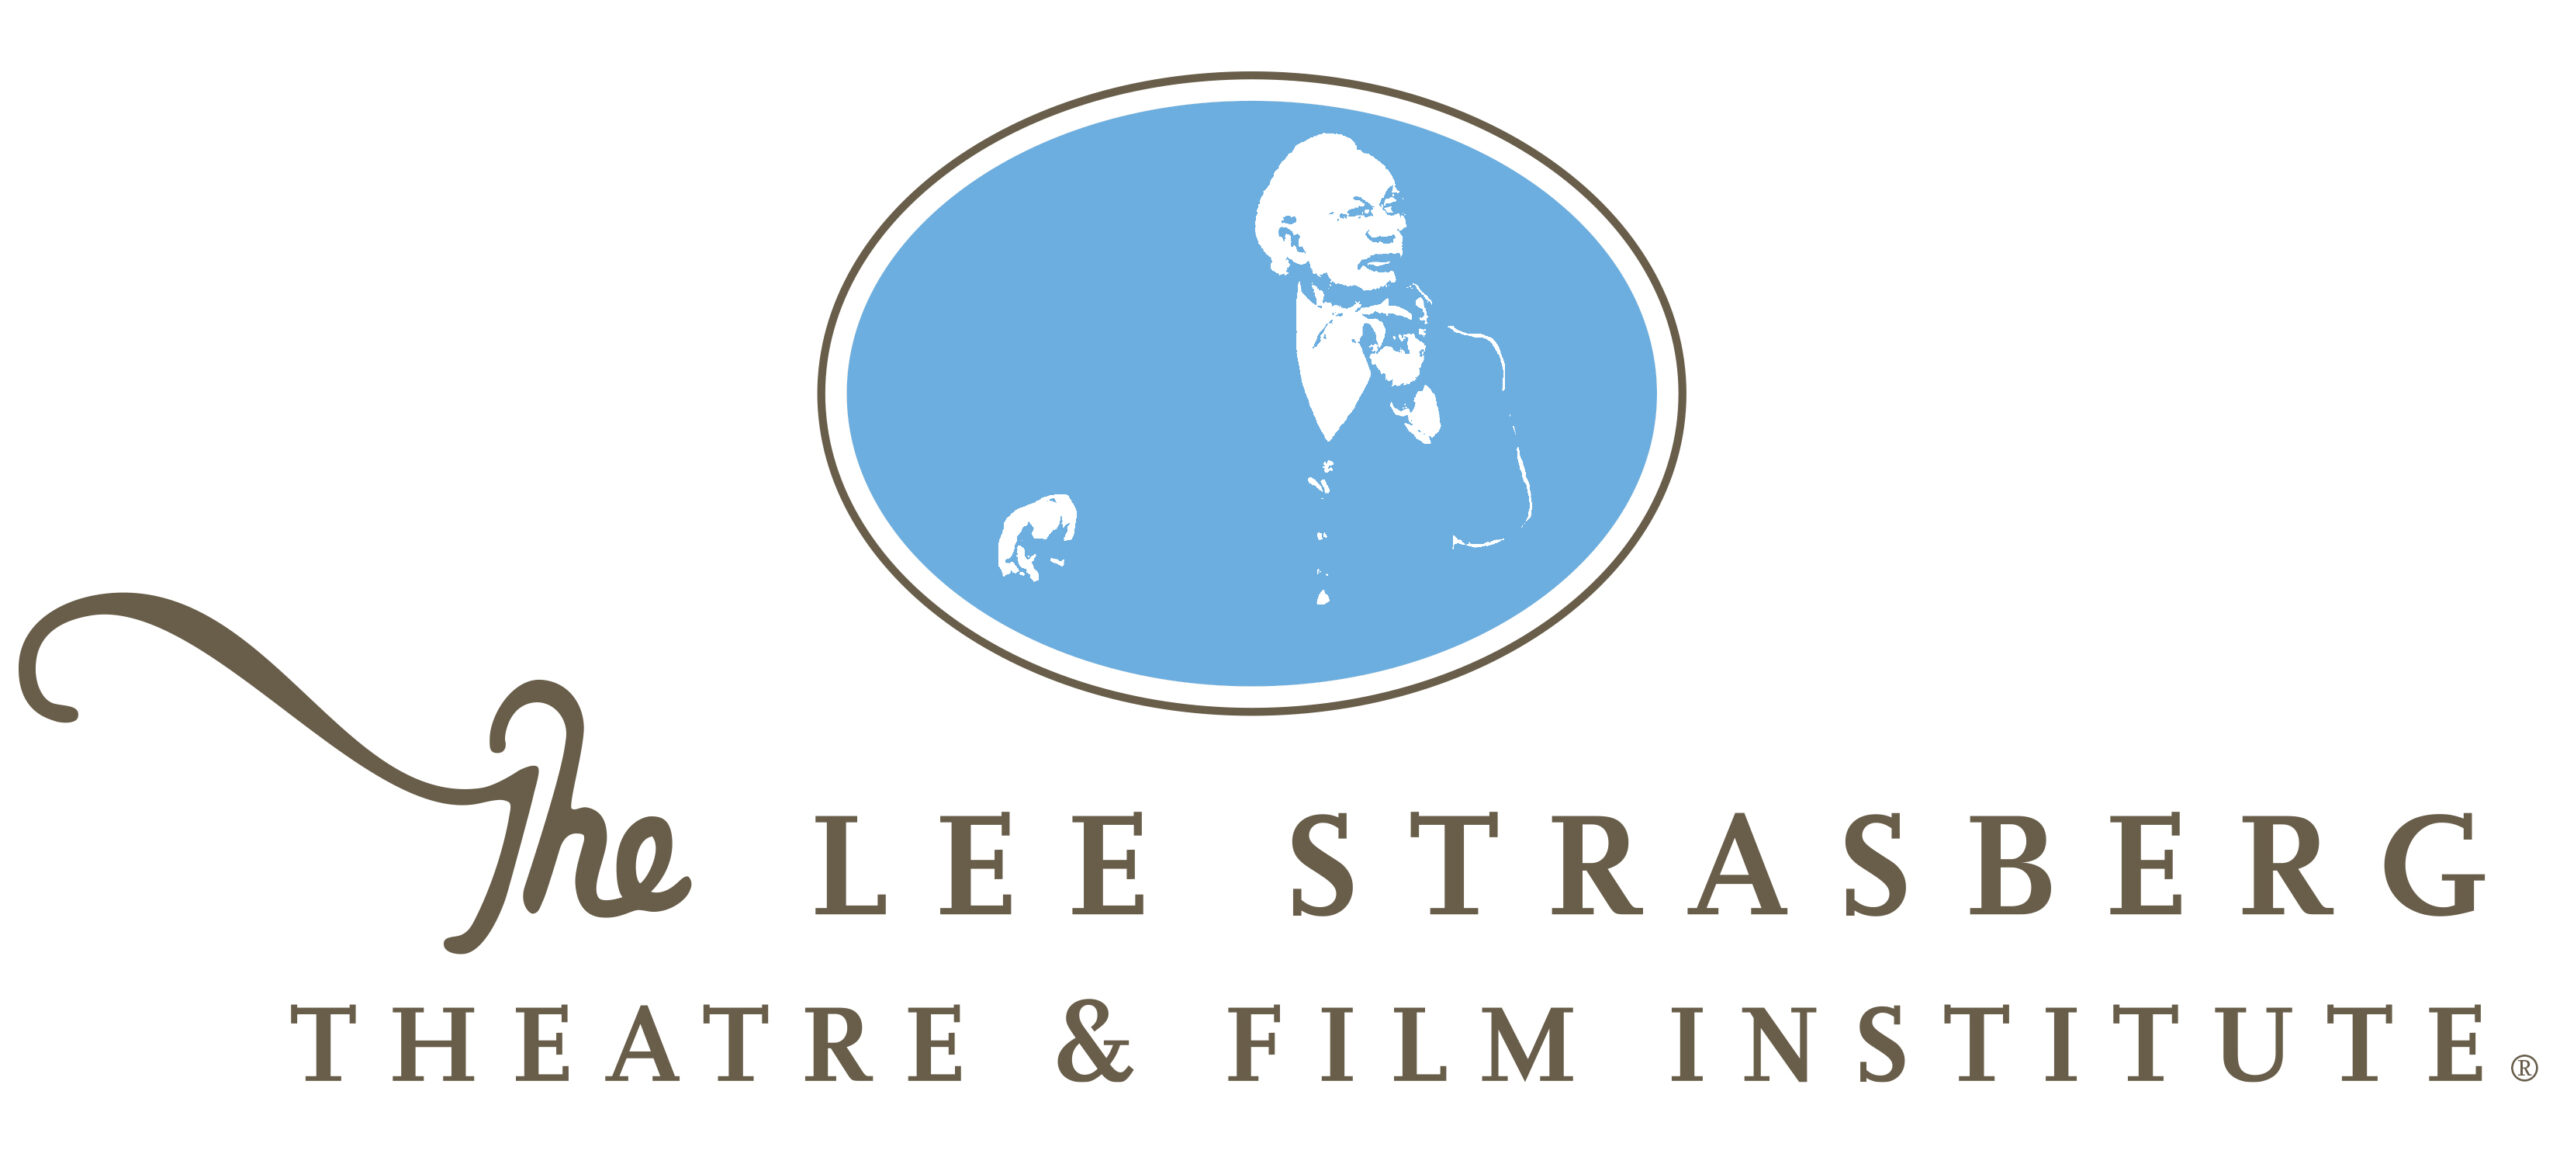 About - The Lee Strasberg Theatre & Film Institute